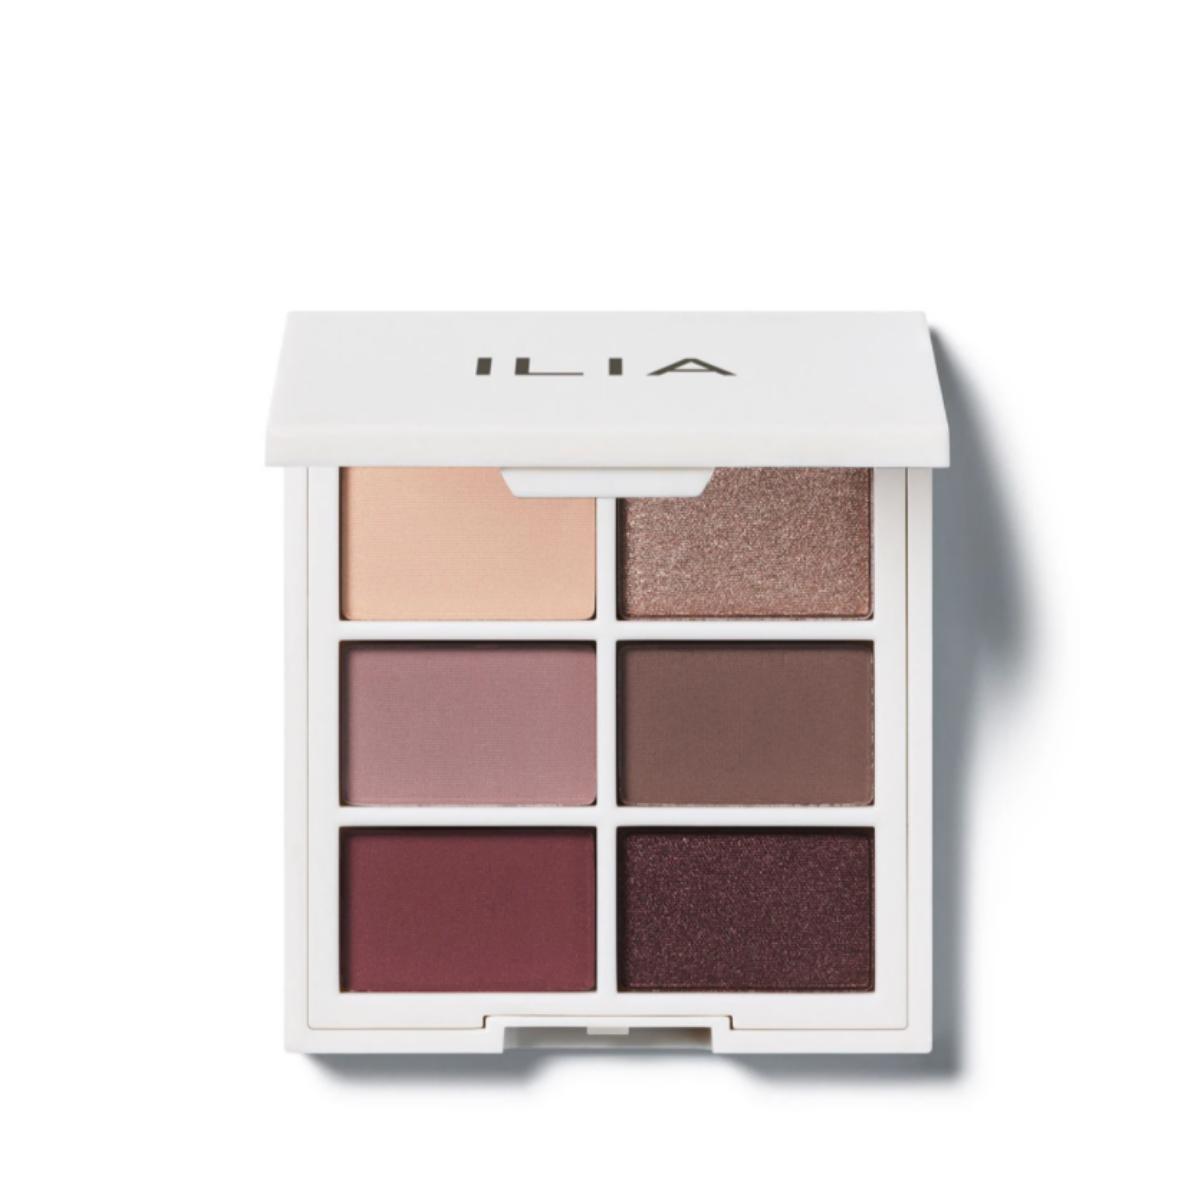 Primary image of Eyeshadow Cool Nude Palette